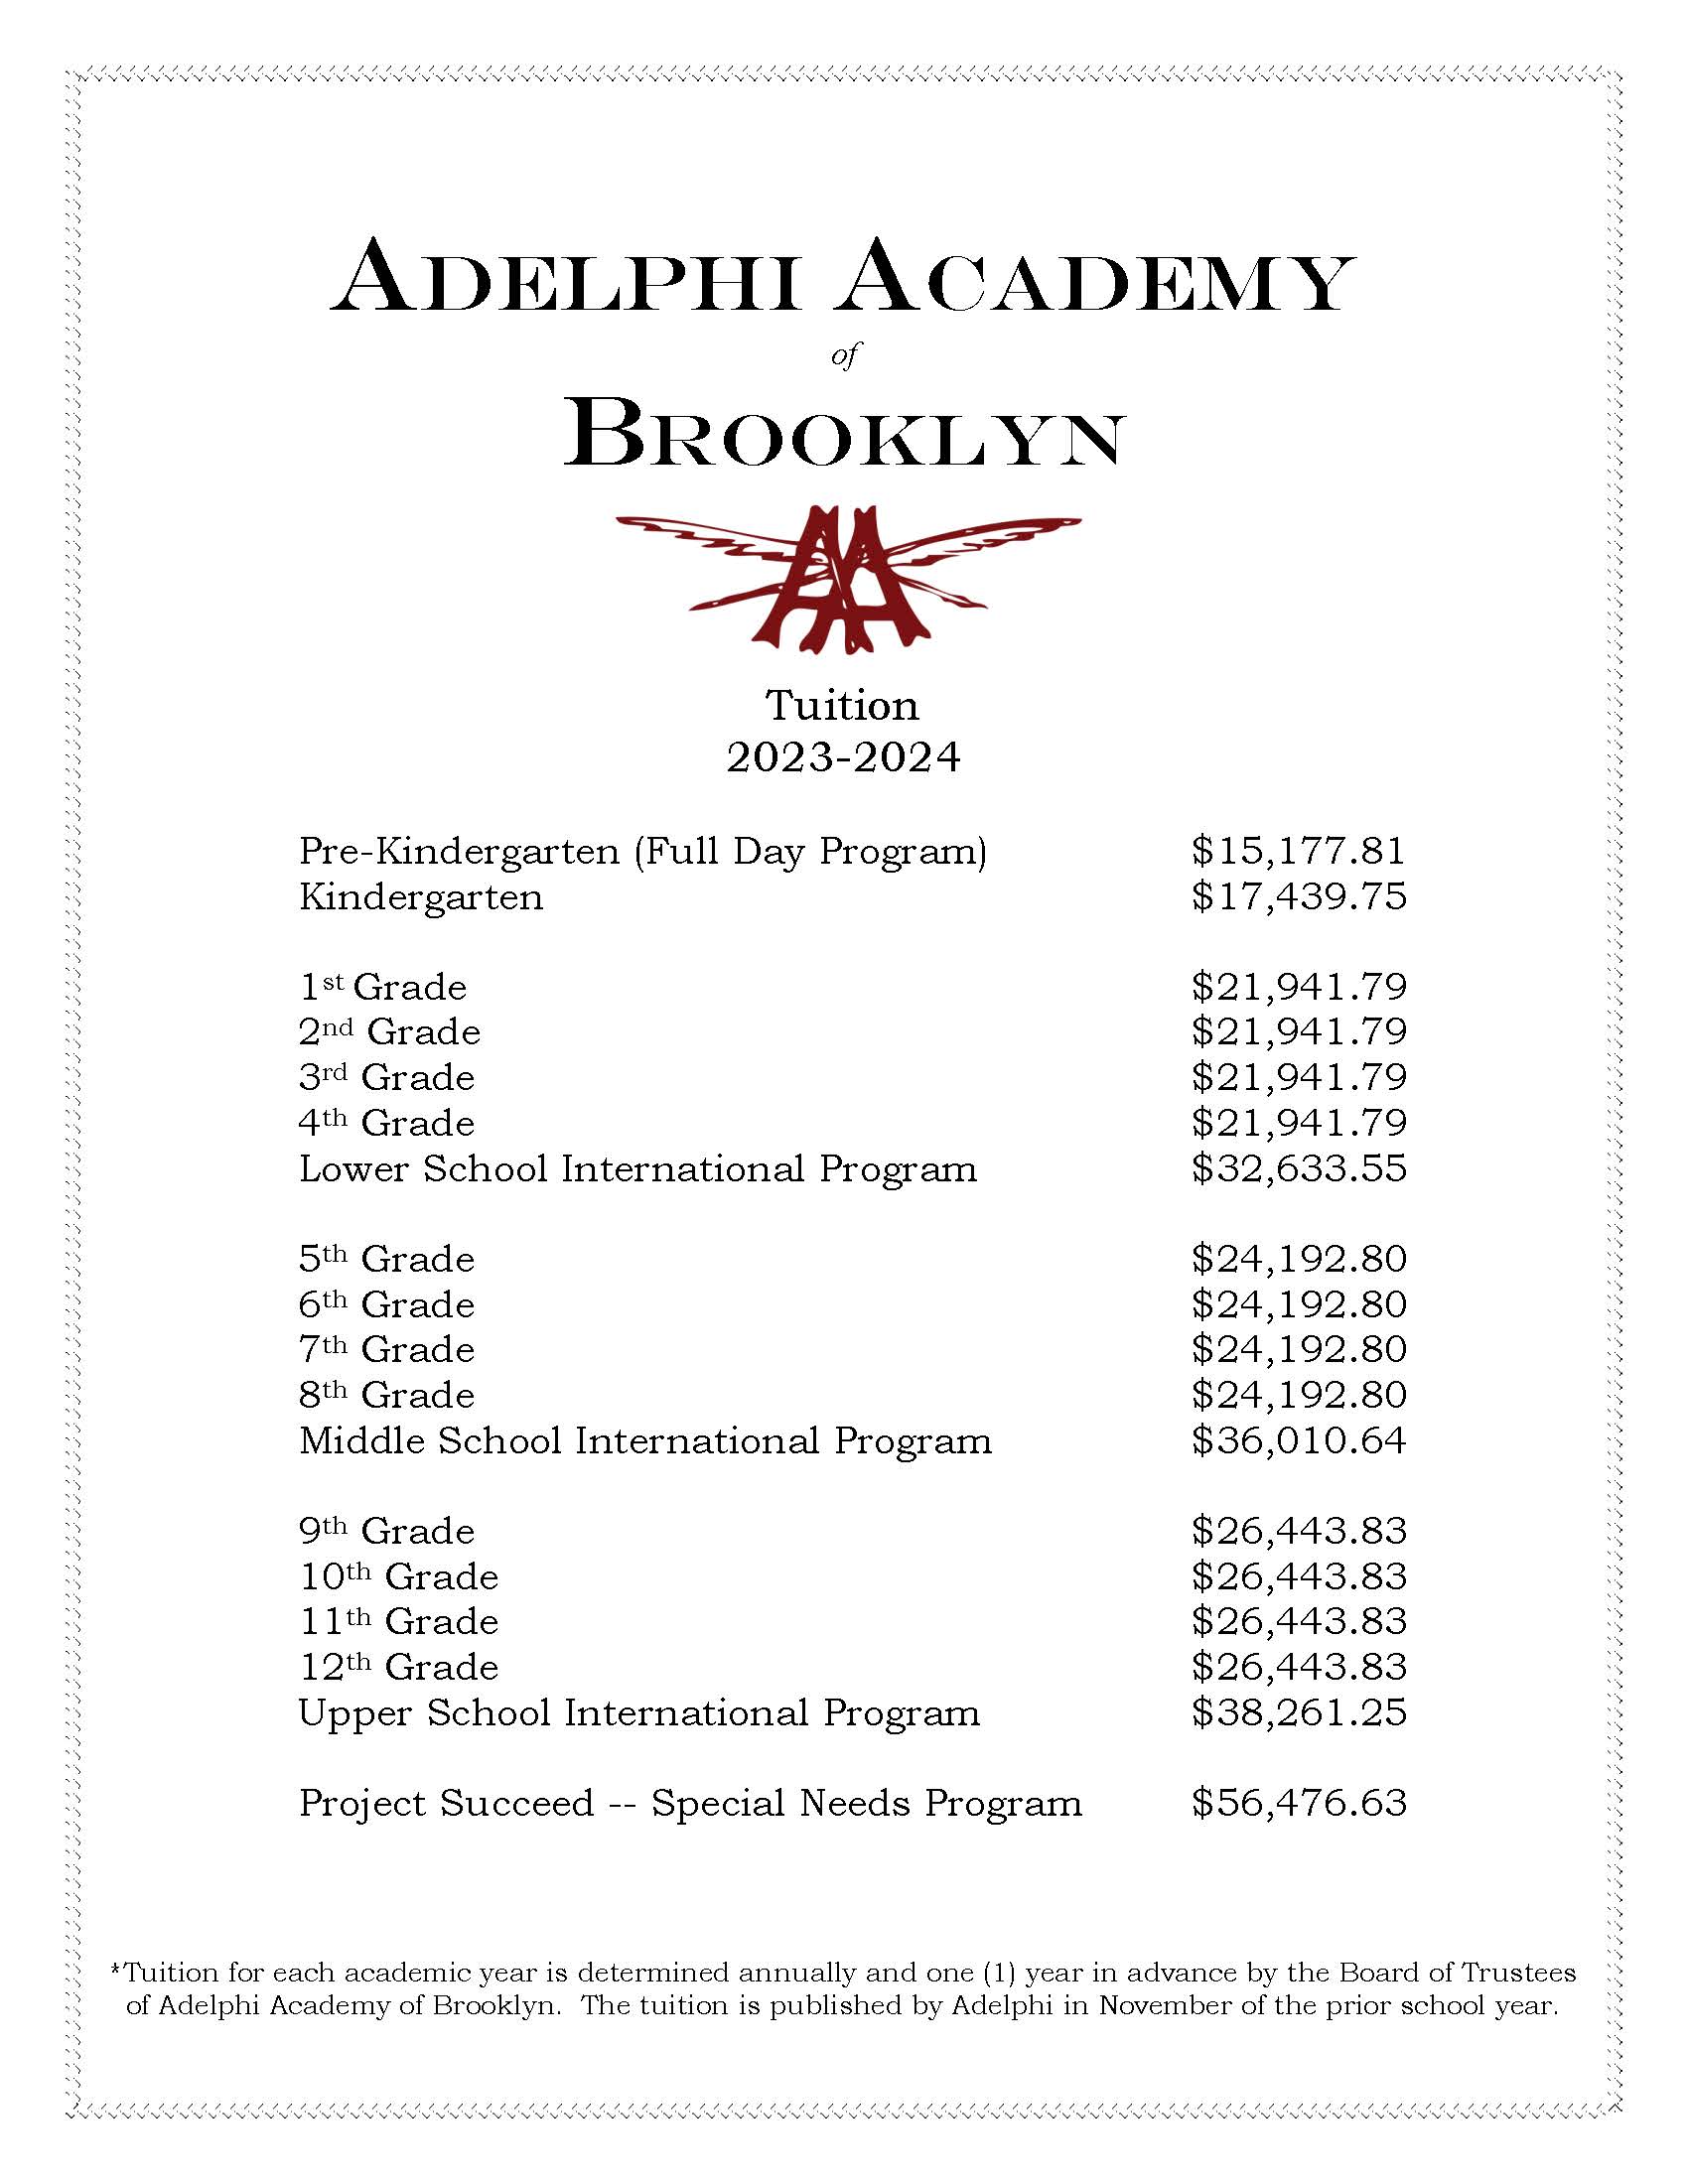 Tuition & Fees Adelphi Academy